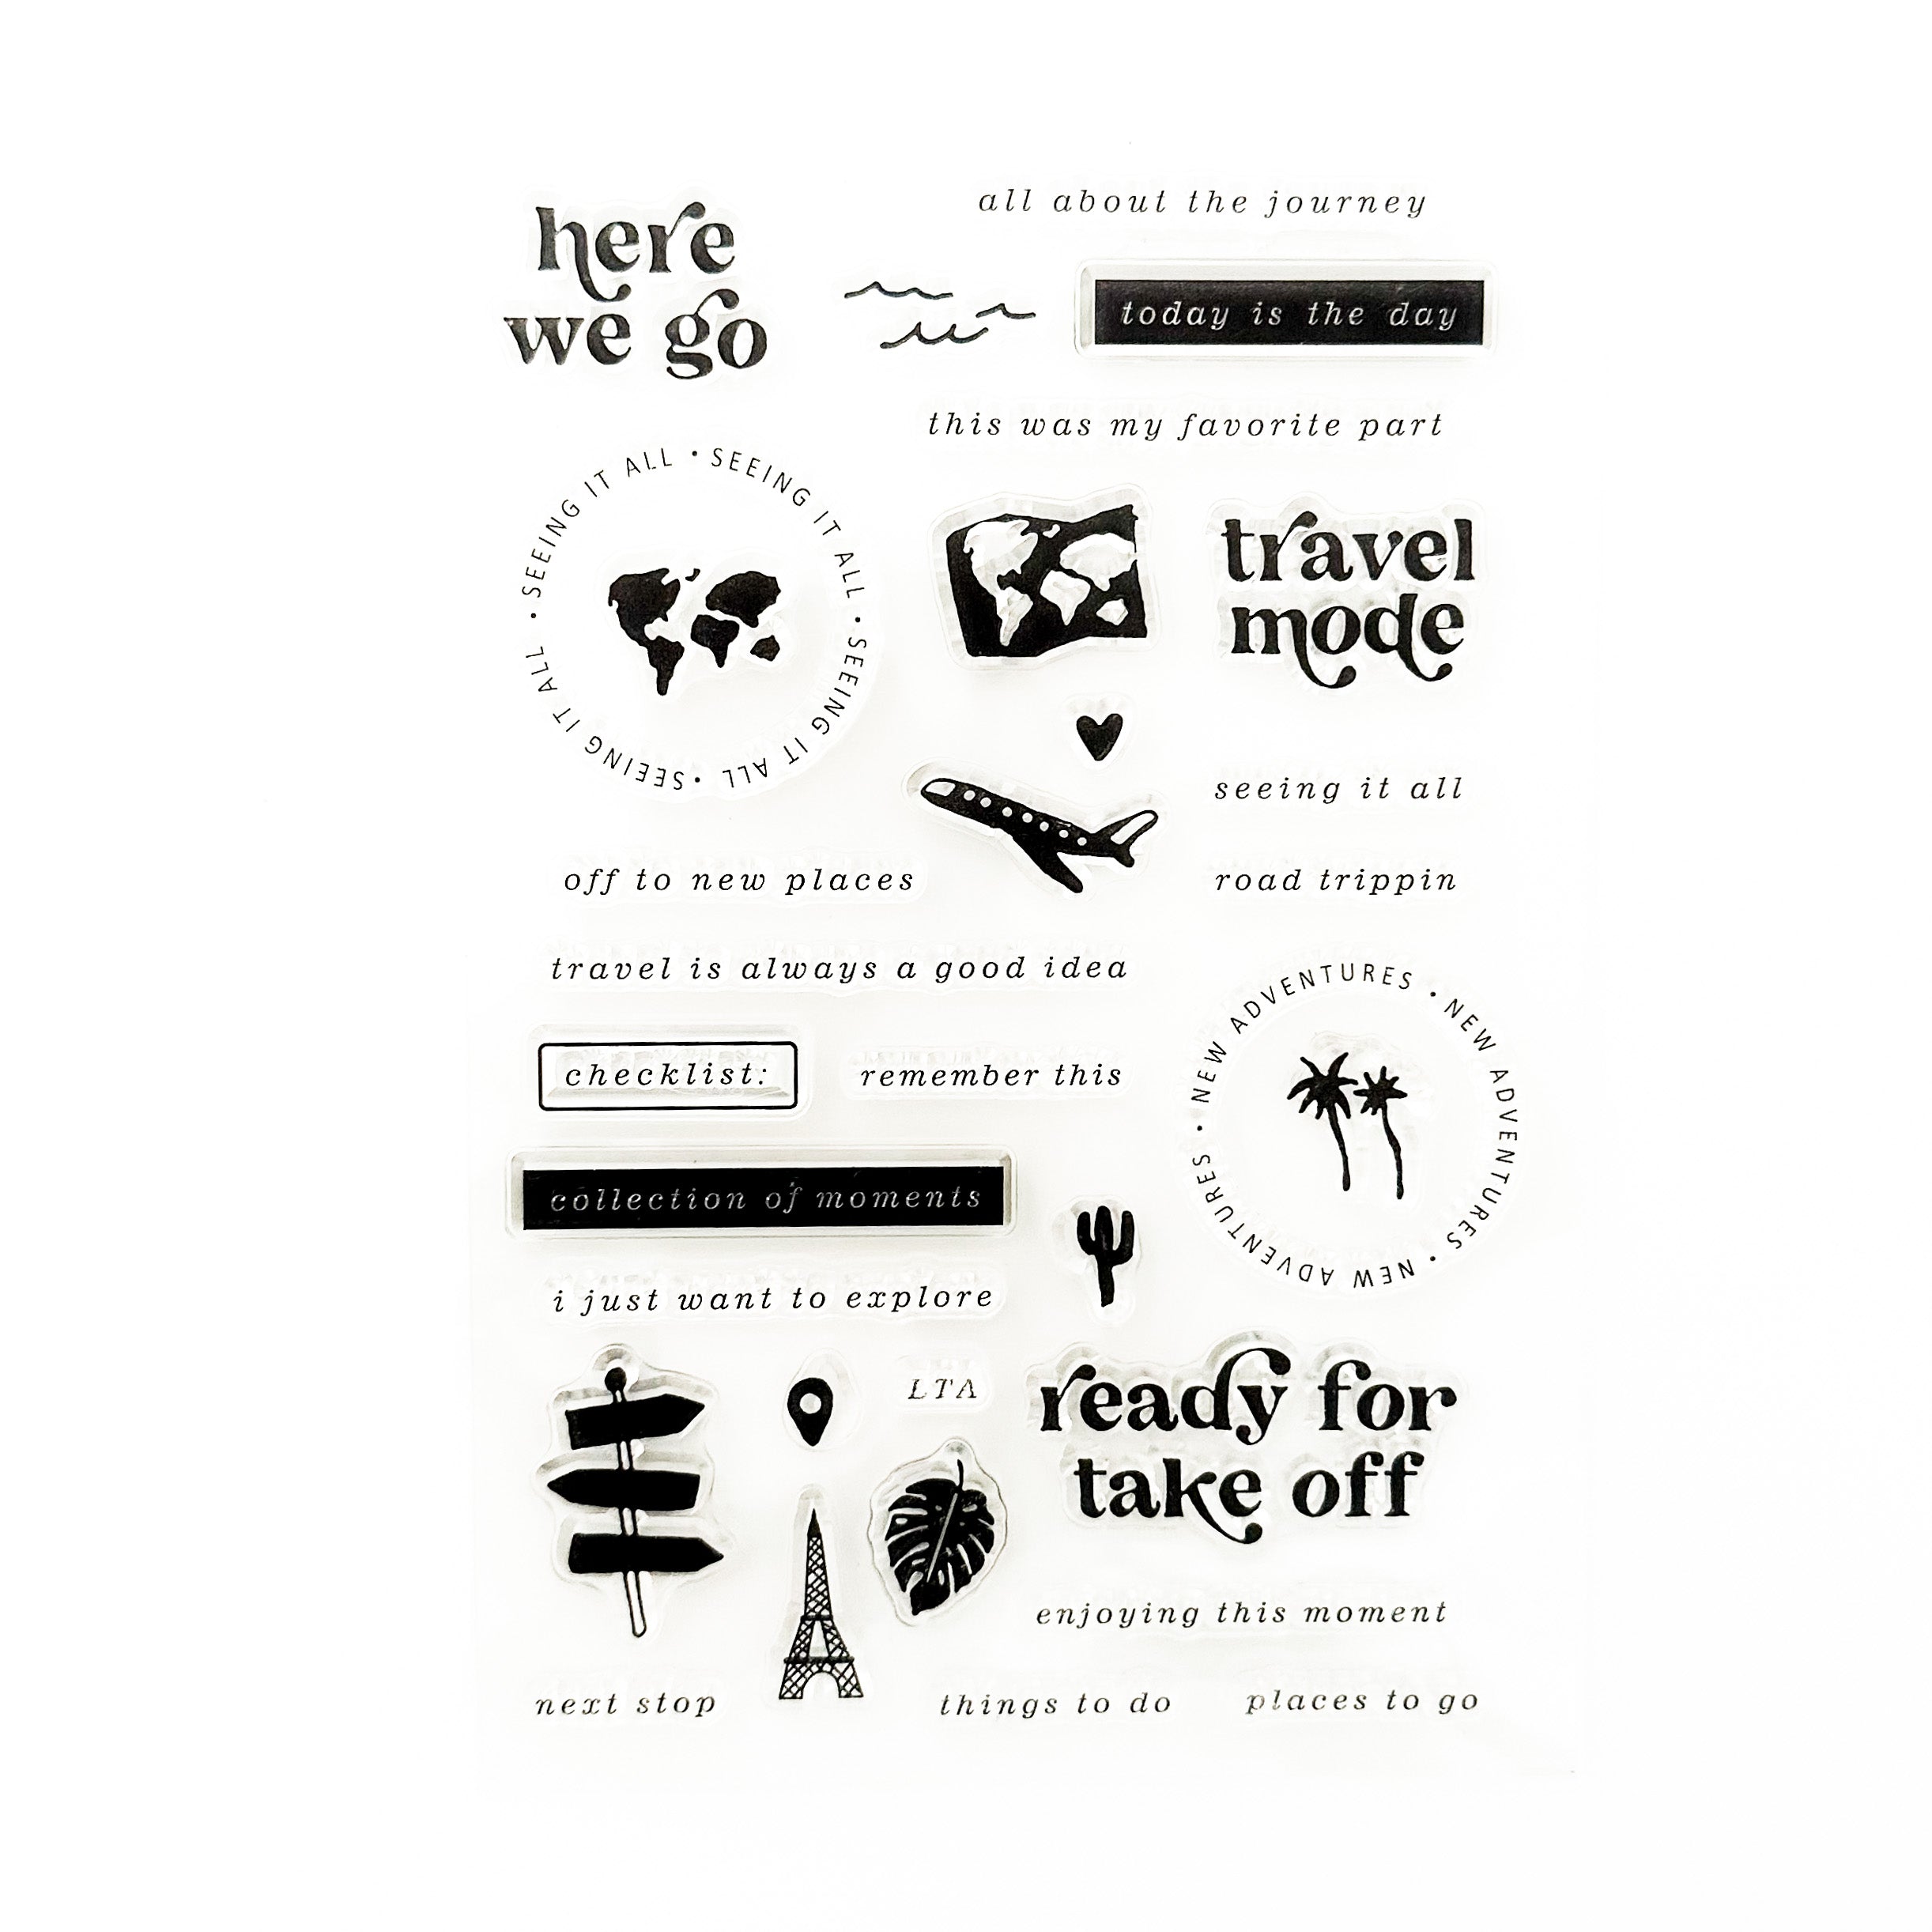  "Here We Go" Travel Journal Stamps: Capture your adventures with these charming travel-themed stamps. Featuring whimsical illustrations of suitcases, planes, and maps, these stamps are perfect for adding a touch of wanderlust to your travel journal. Whether you're documenting a road trip or a globe-trotting adventure, these stamps are a fun and creative way to preserve your memories. These stamps are sold at BBB Supplies Craft Shop.